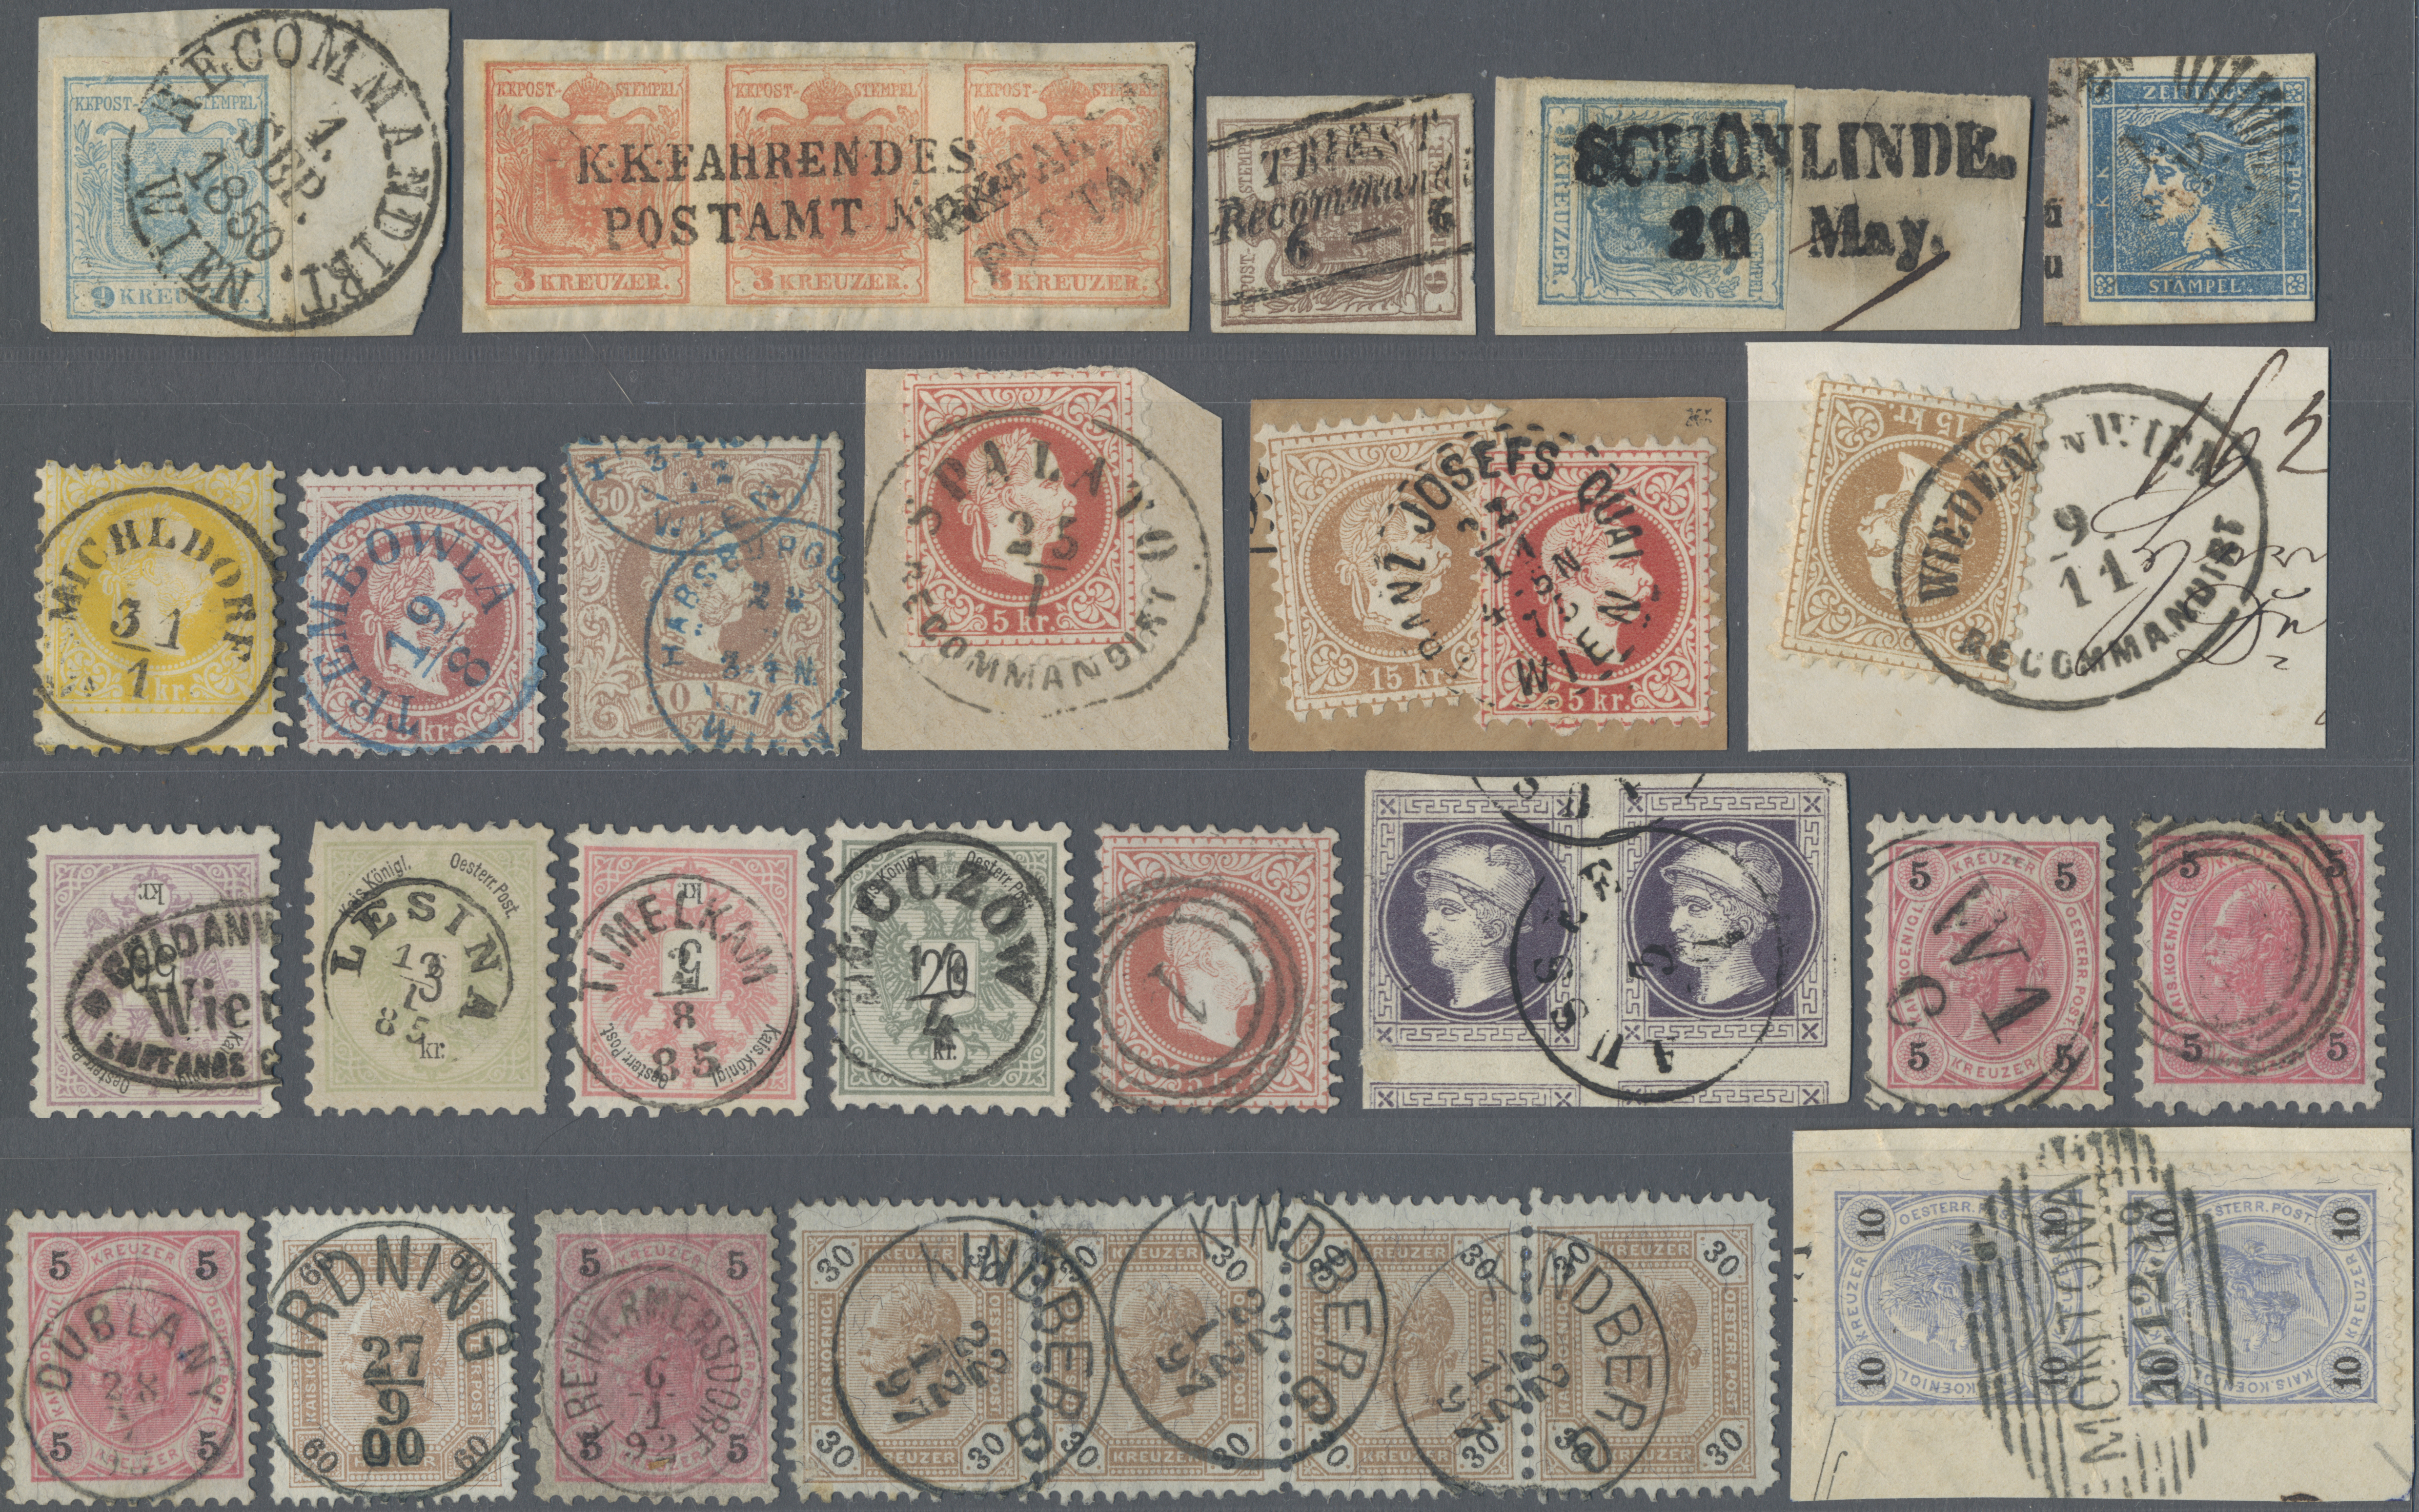 Lot 06625 - österreich  -  Auktionshaus Christoph Gärtner GmbH & Co. KG 53rd AUCTION - Day 4, Collections Overseas, Air & Shipmail, Thematics, Europe